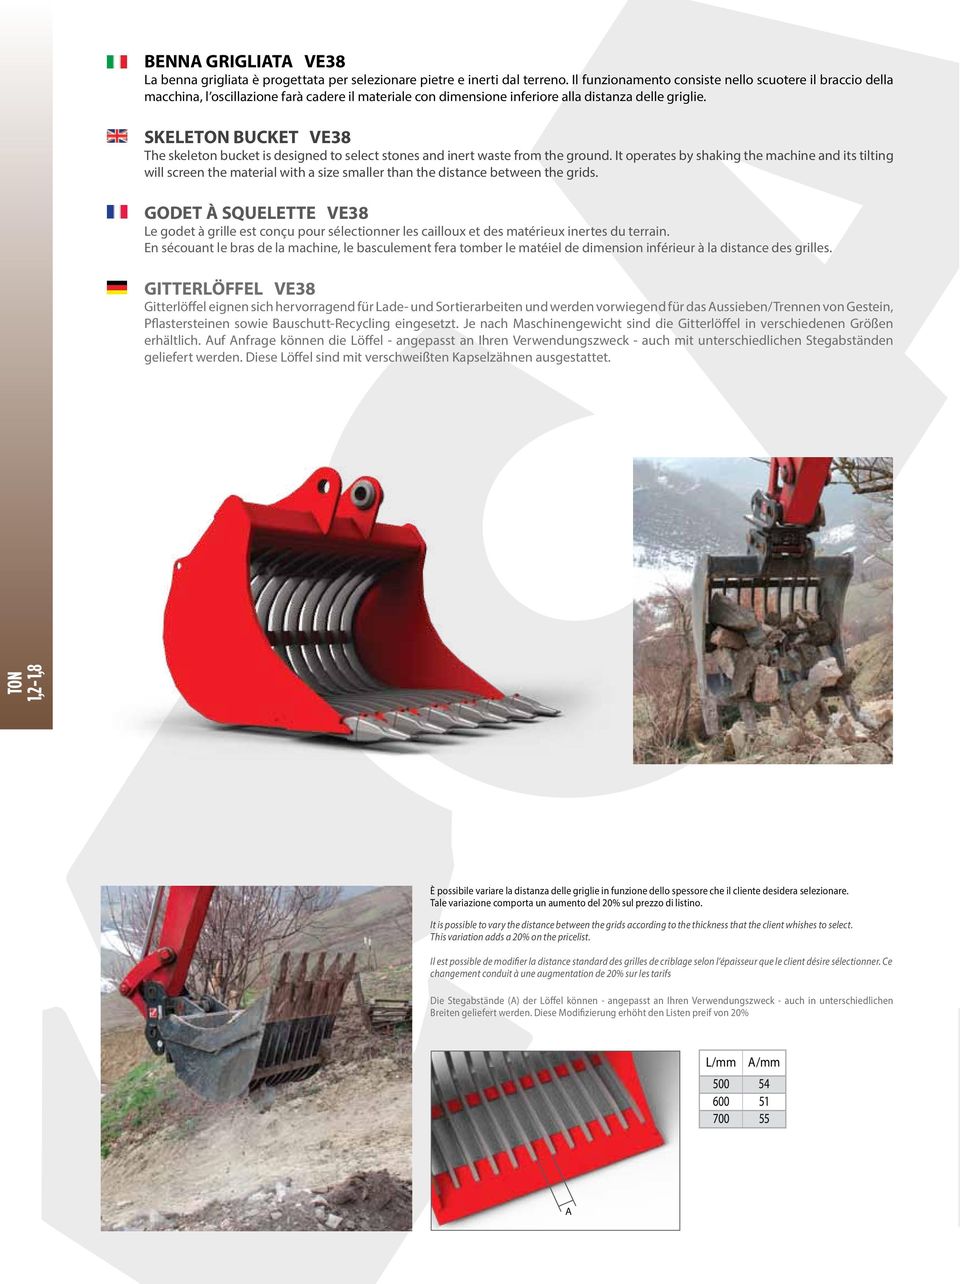 SKELE BUCKET VE38 The skeleton bucket is designed to select stones and inert waste from the ground.